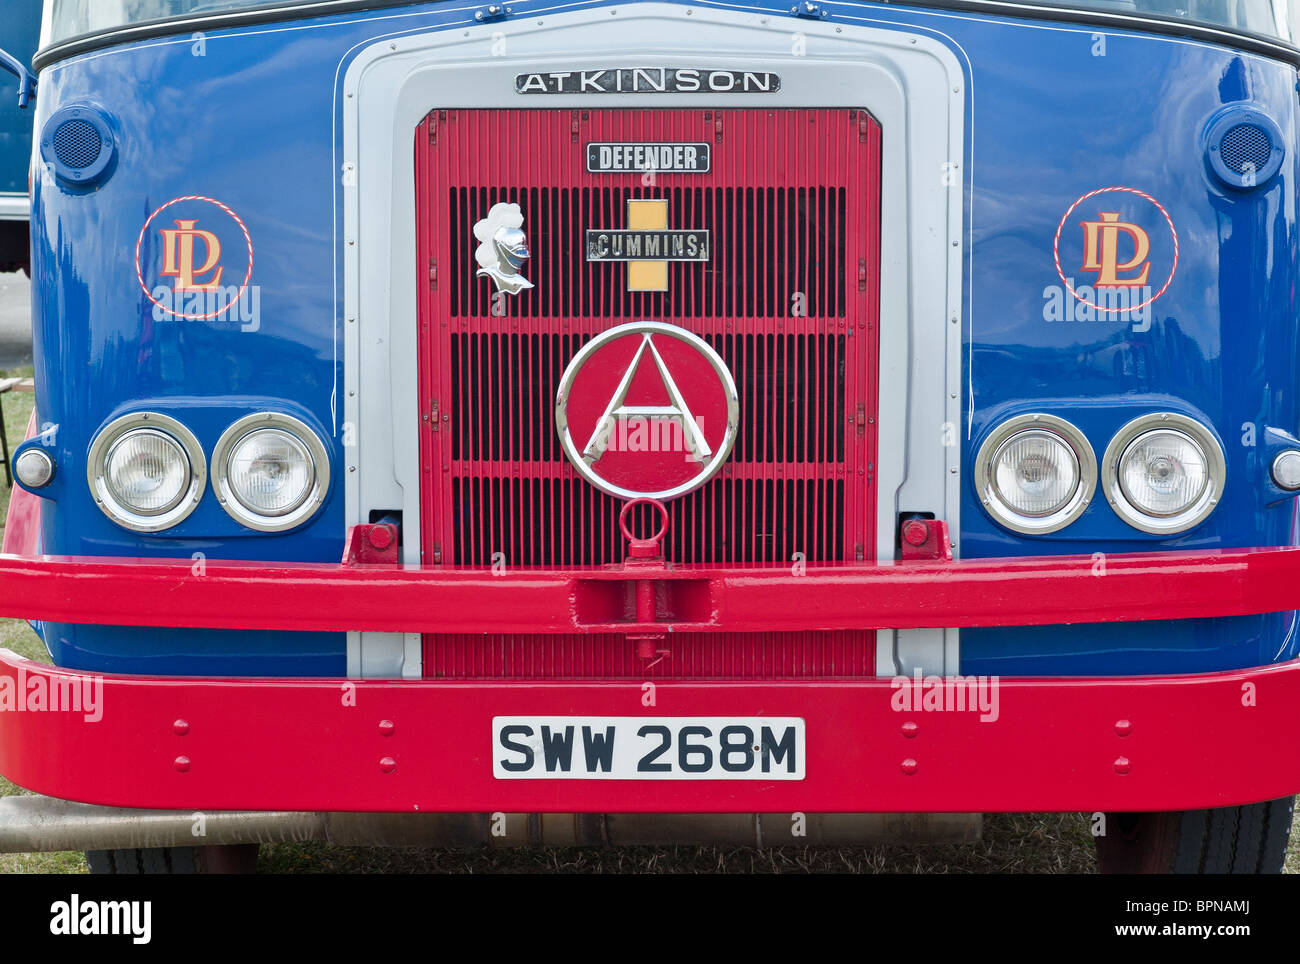 Front of 1970s Atkinson Defender lorry on show in UK 2010 Stock Photo